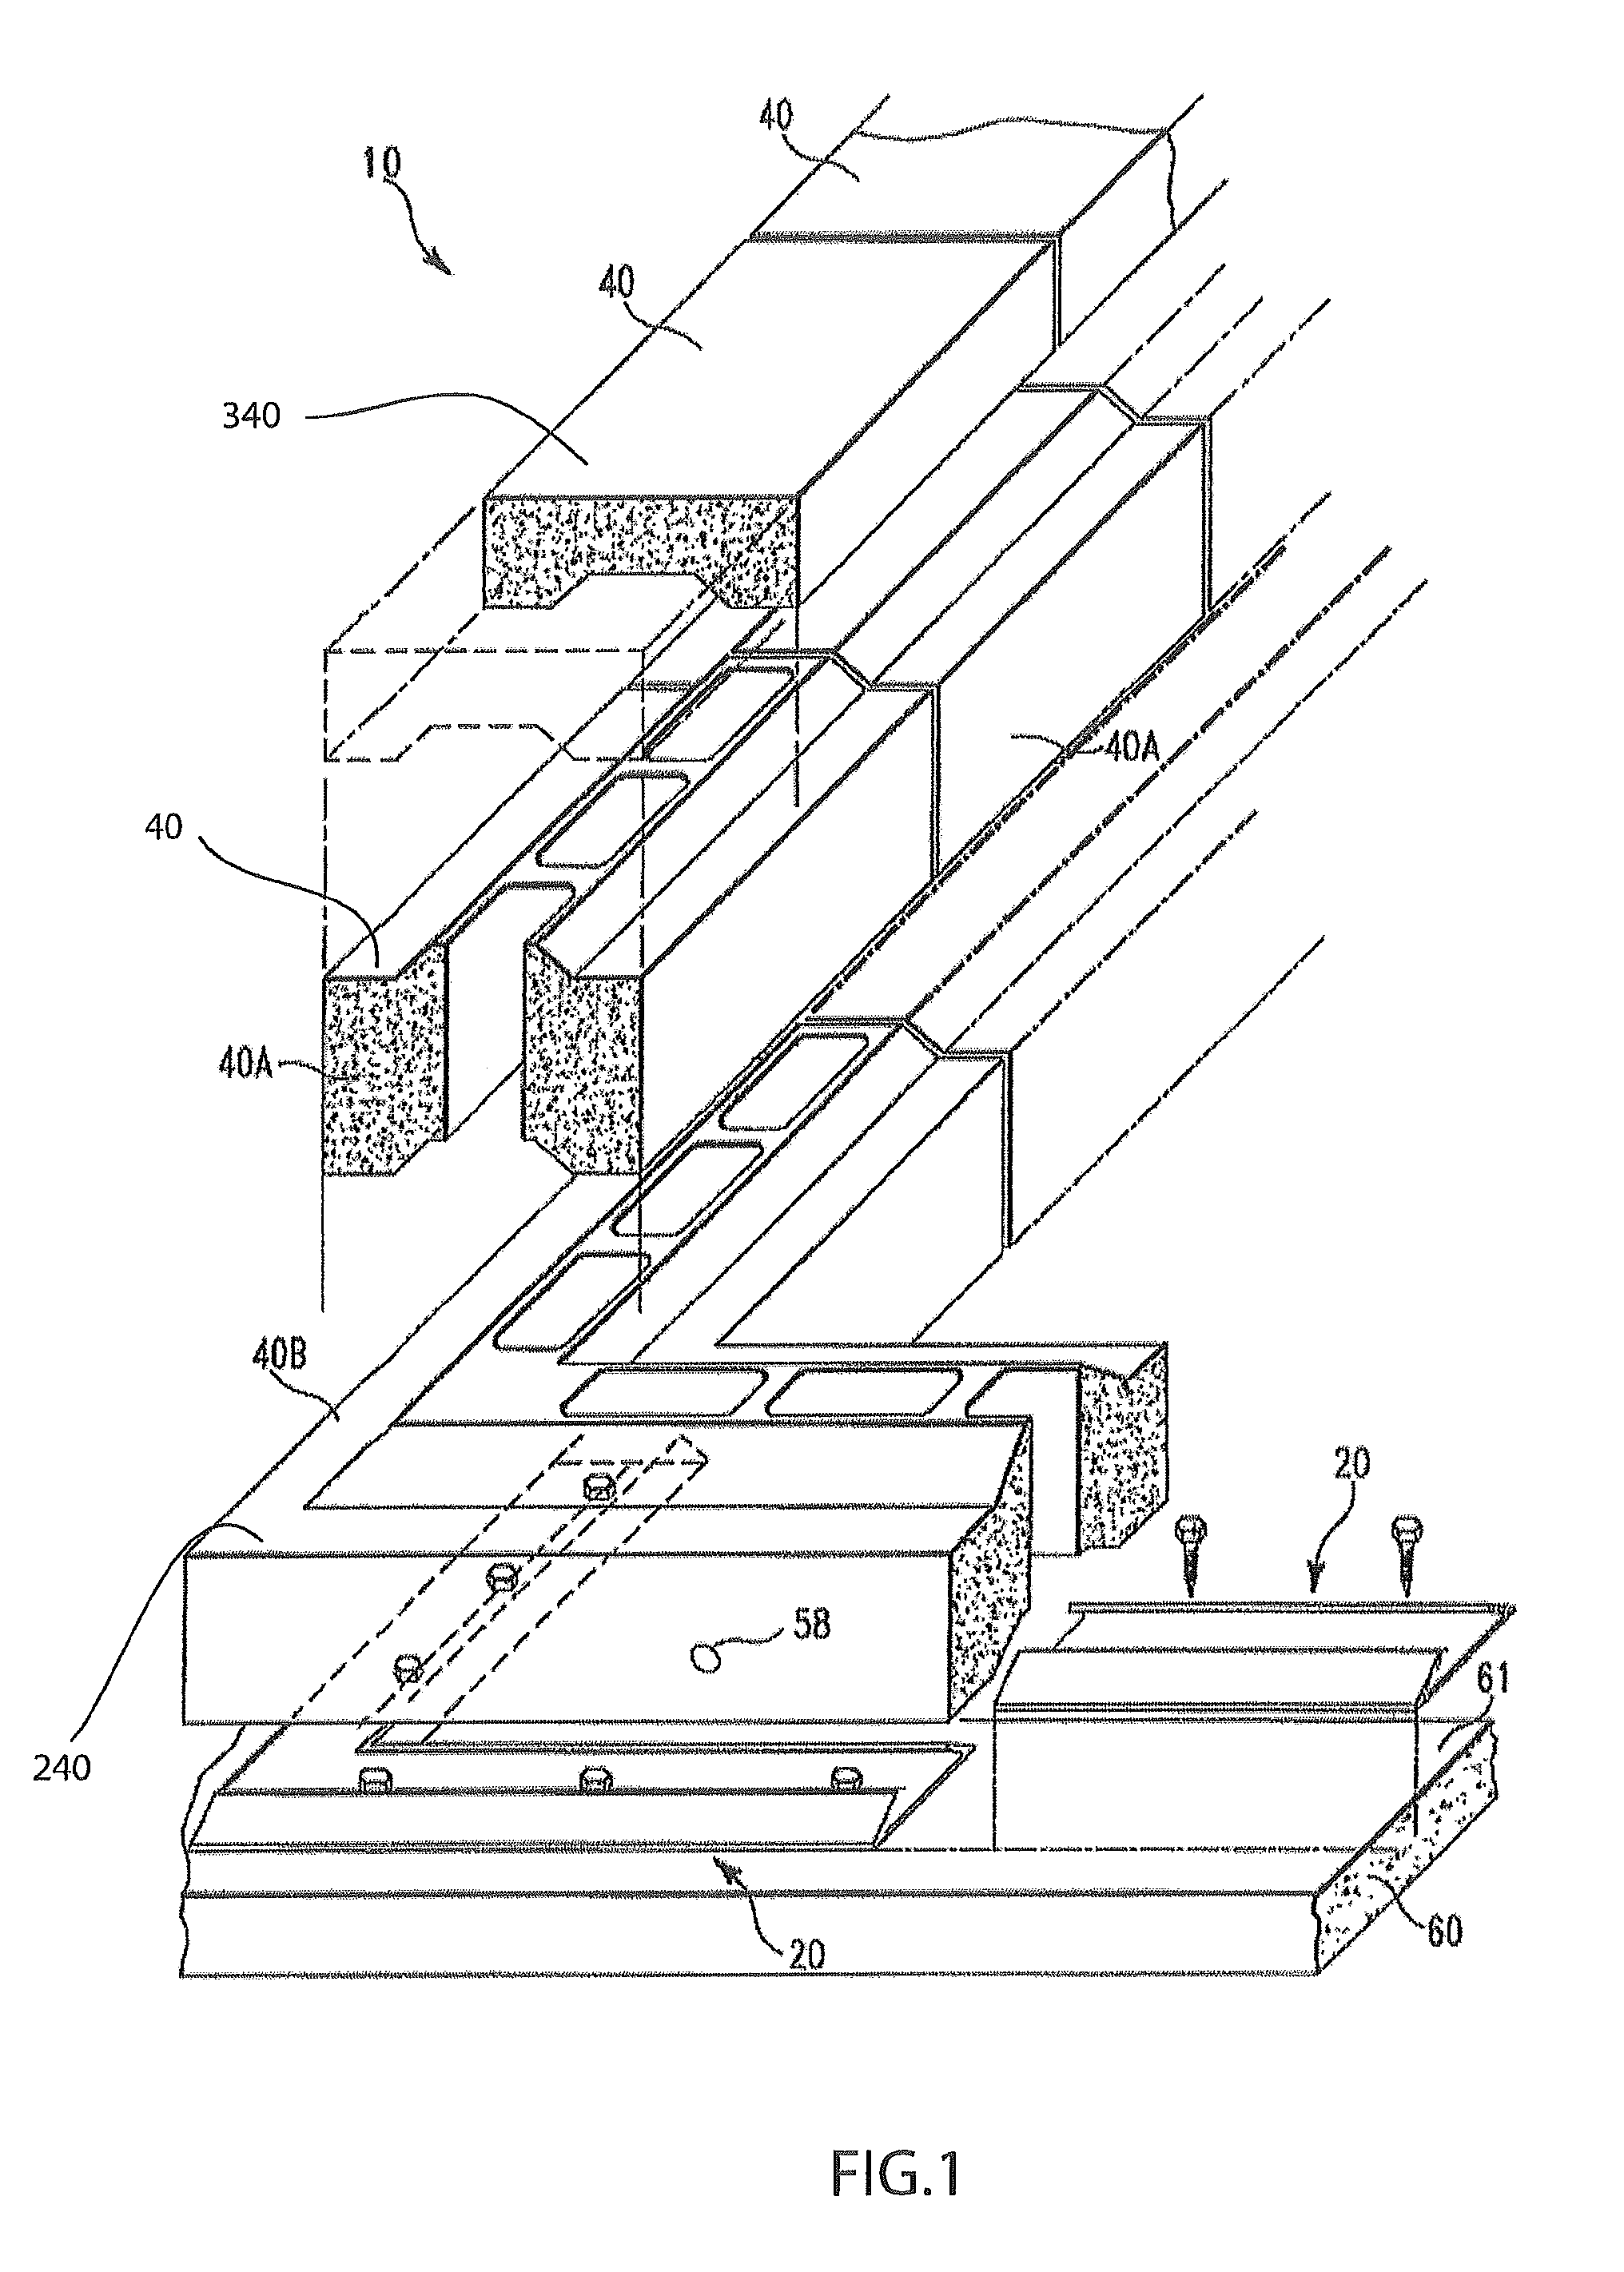 Stacking masonry block system with transition block and utility groove running therethrough